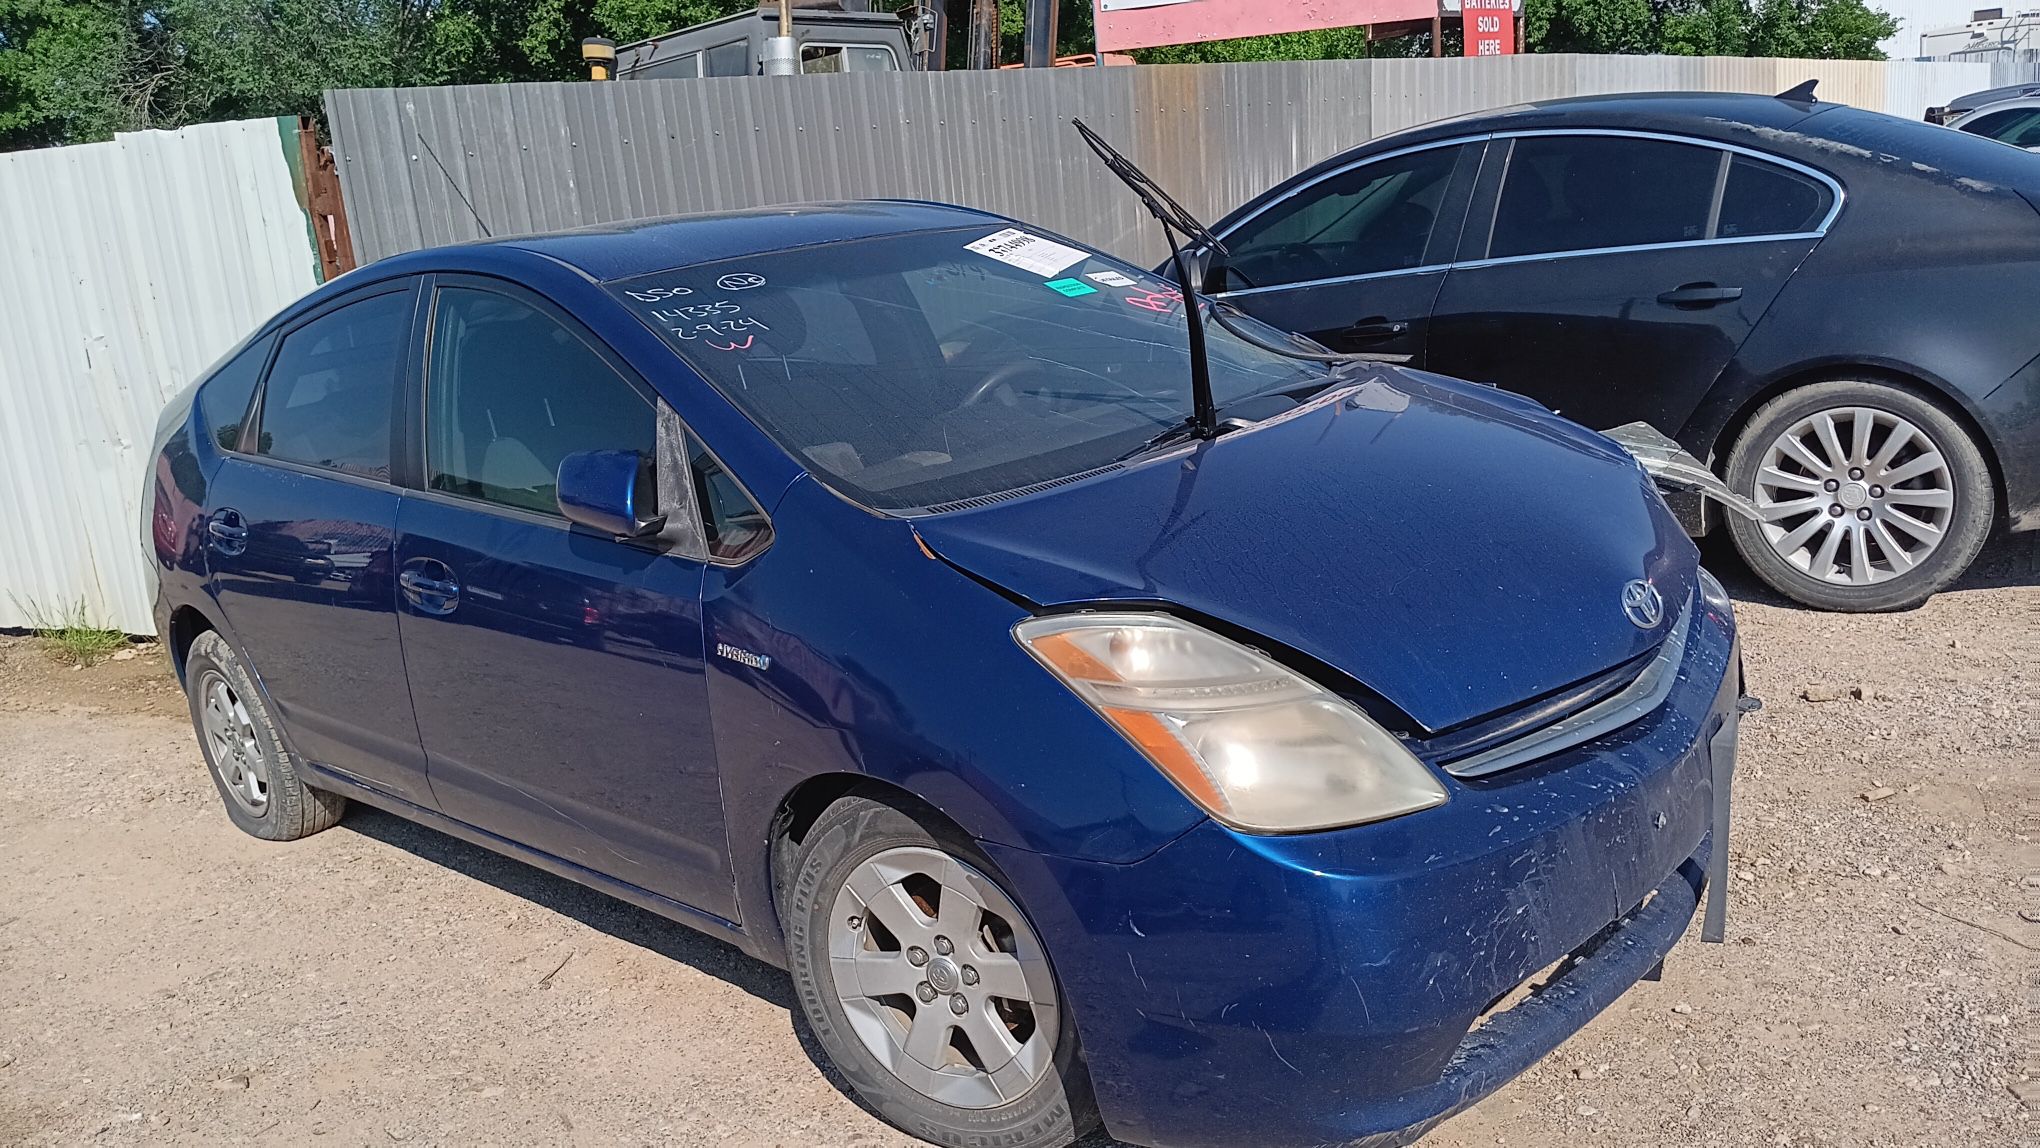 2008 Toyota Prius - Parts Only #ED1